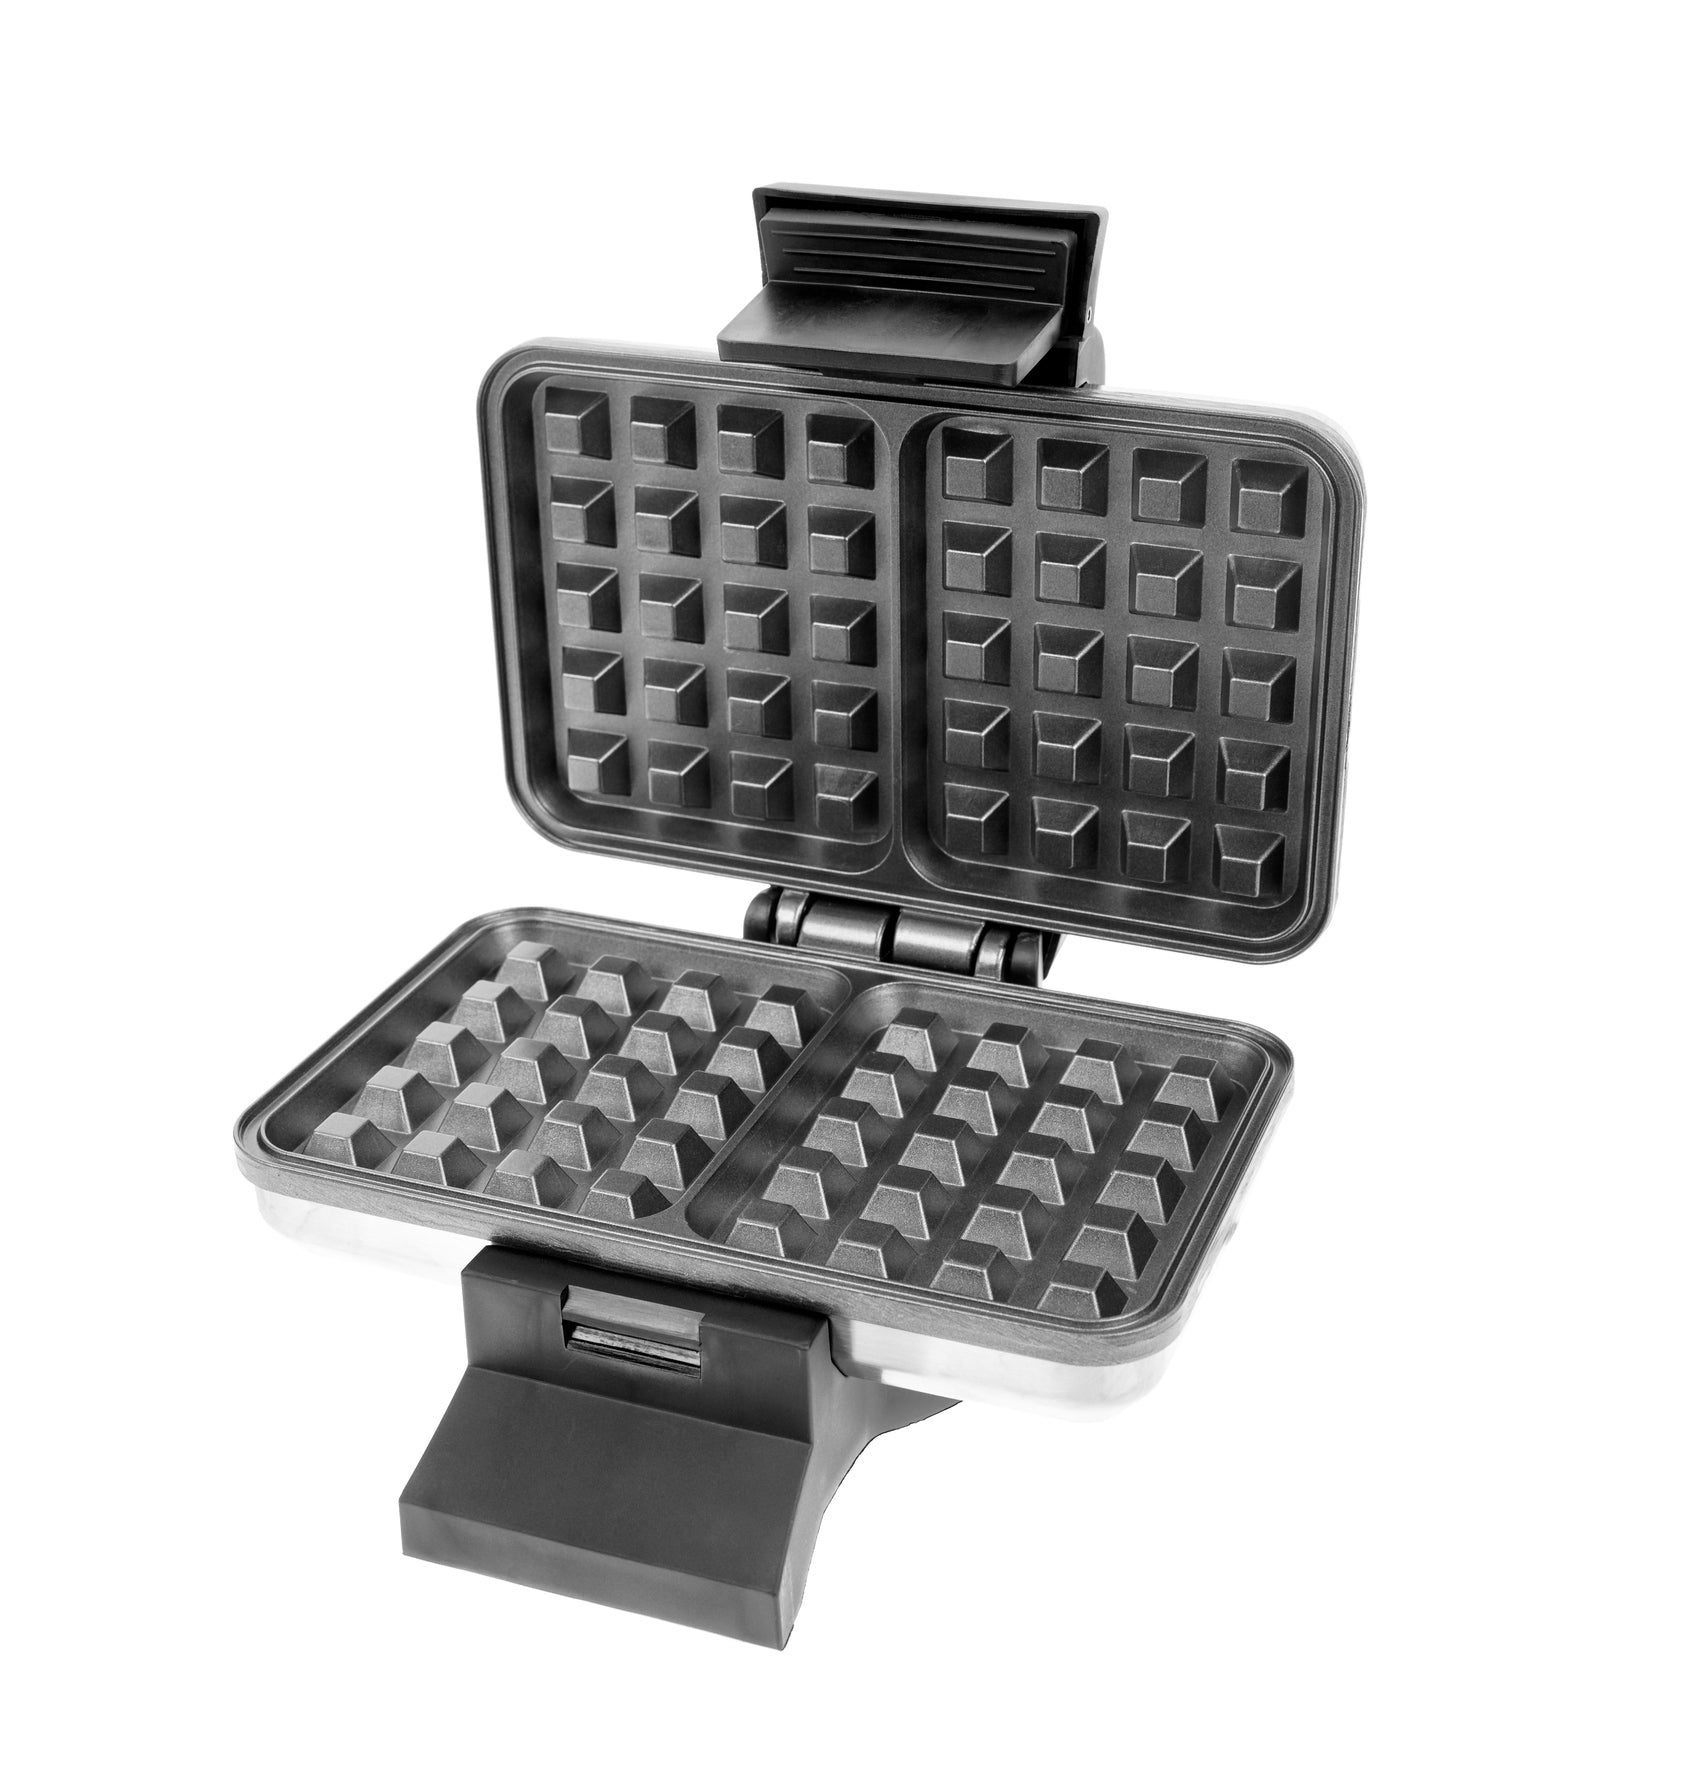 Commercial double electric waffle maker